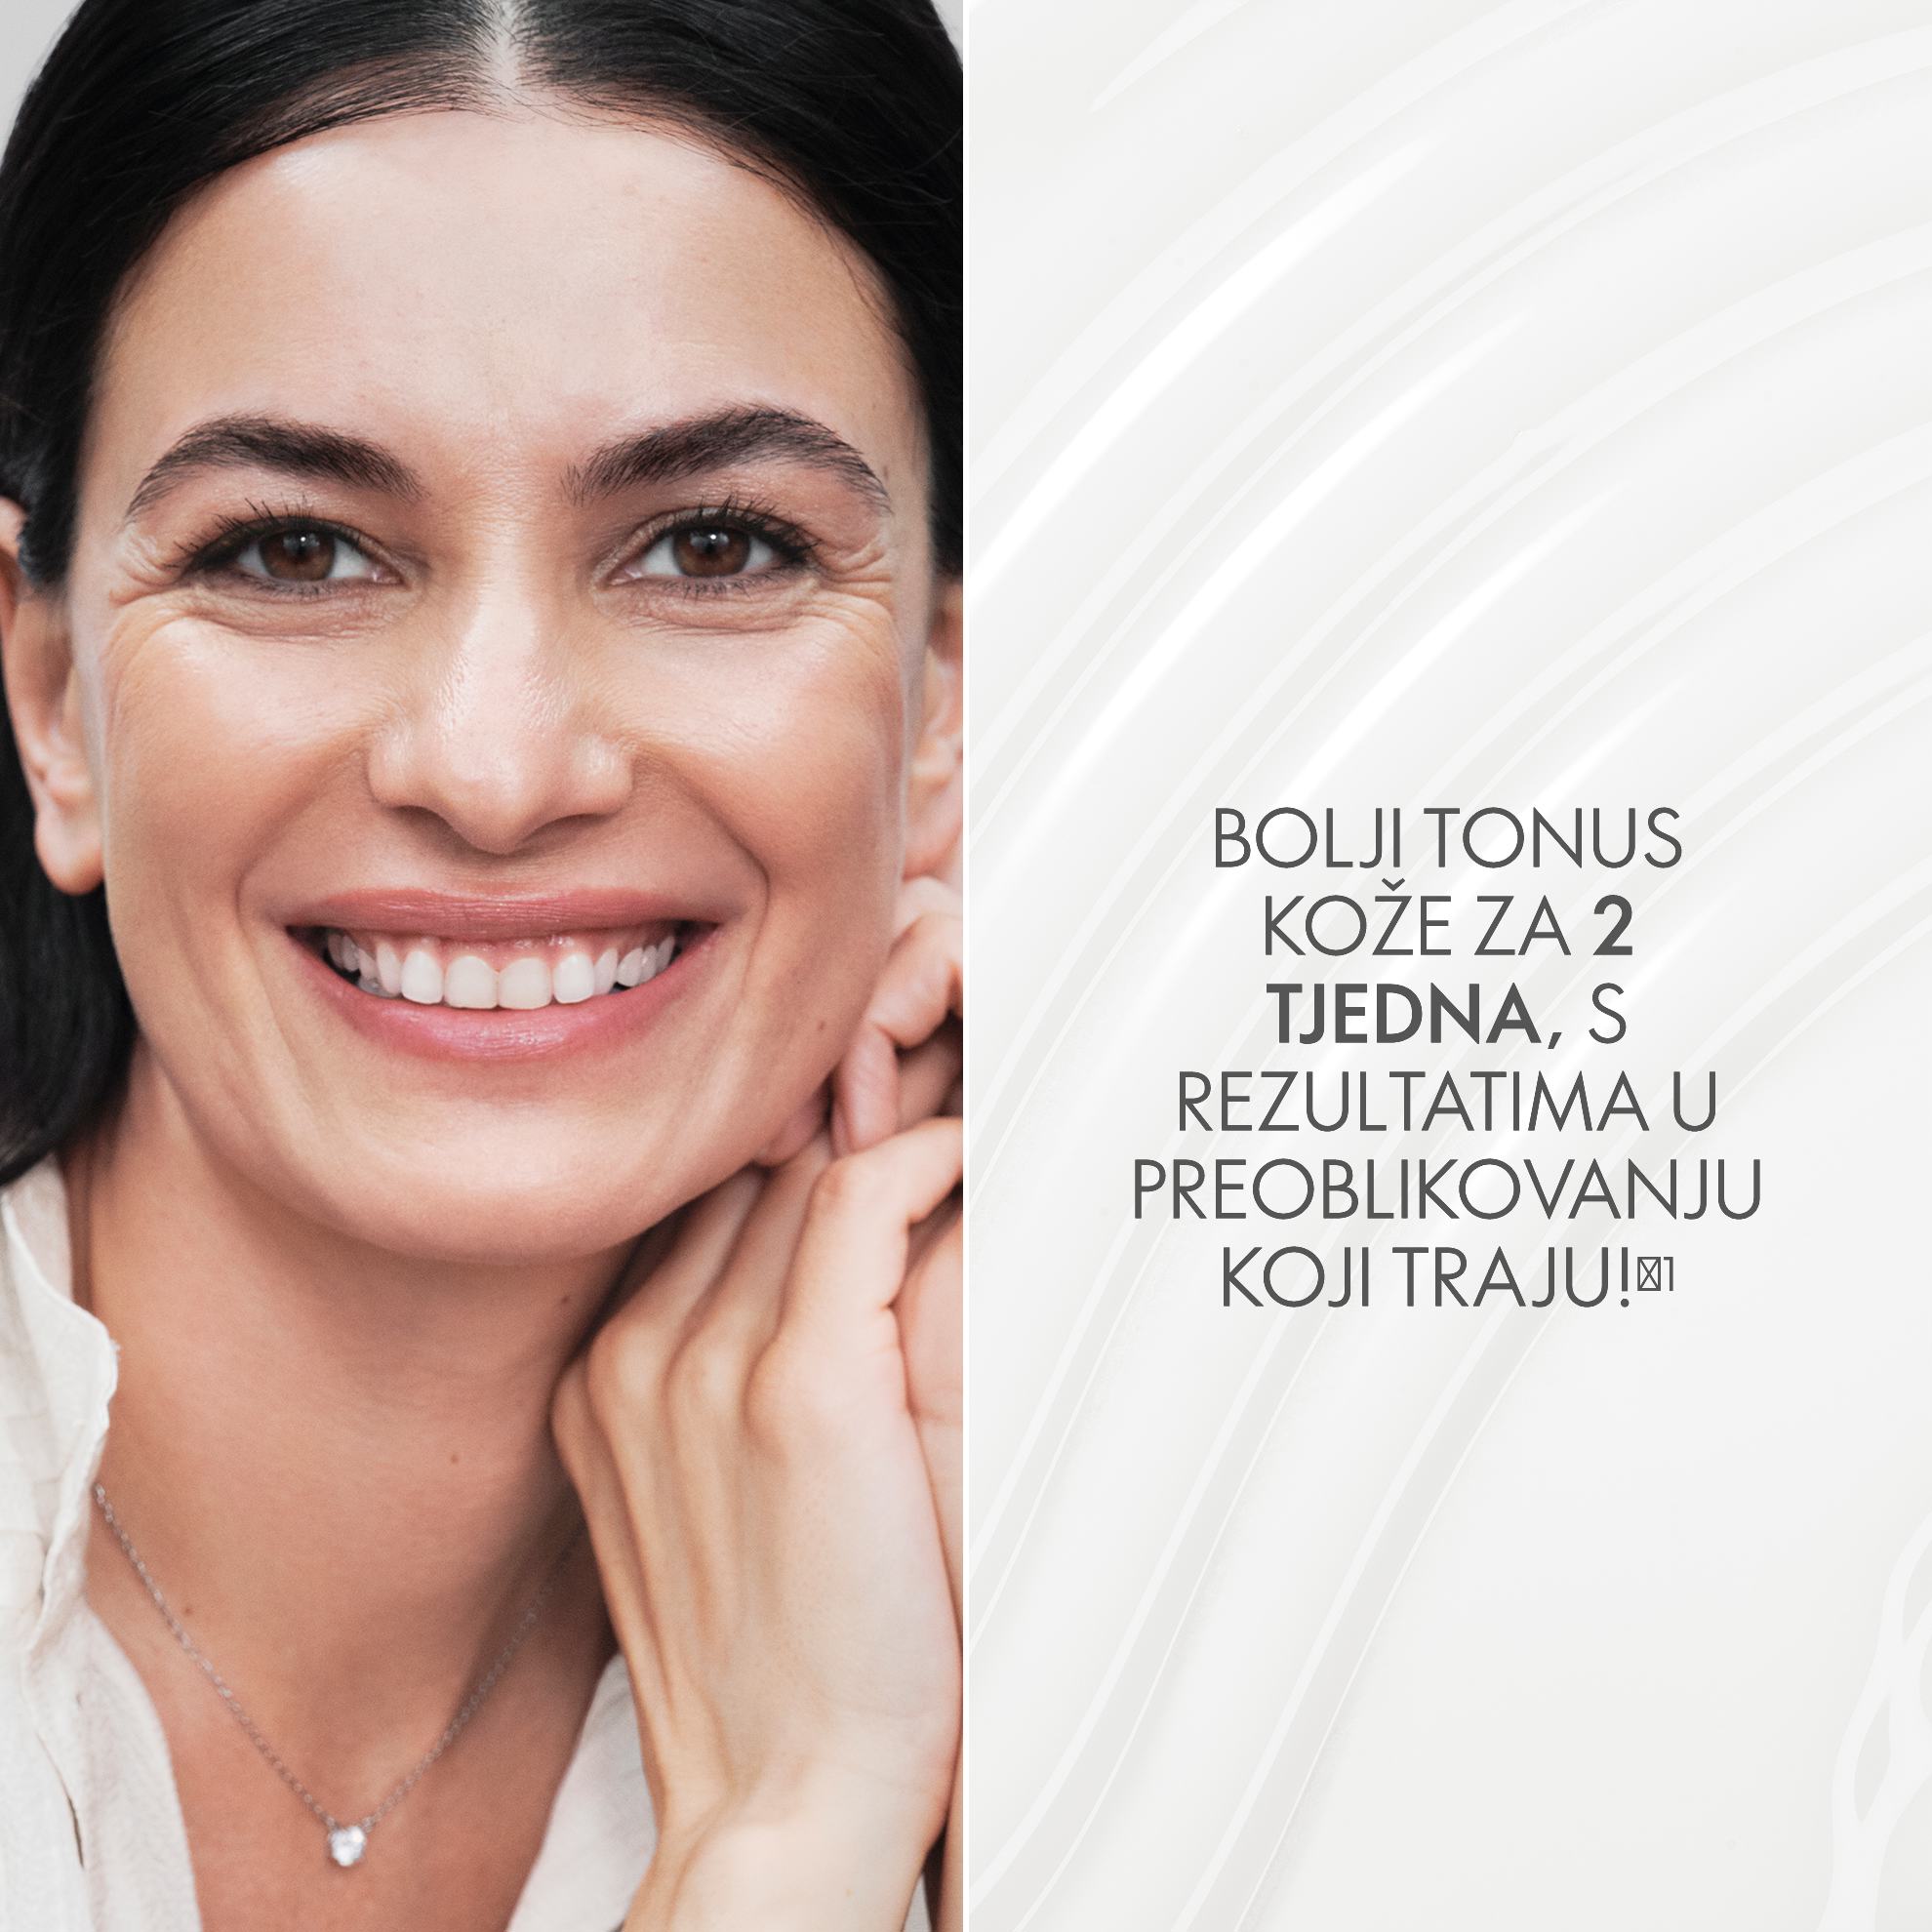 https://media-cdn.oriflame.com/productImage?externalMediaId=product-management-media%2fProducts%2f43691%2fHR%2f43691_2.png&id=17556264&version=1